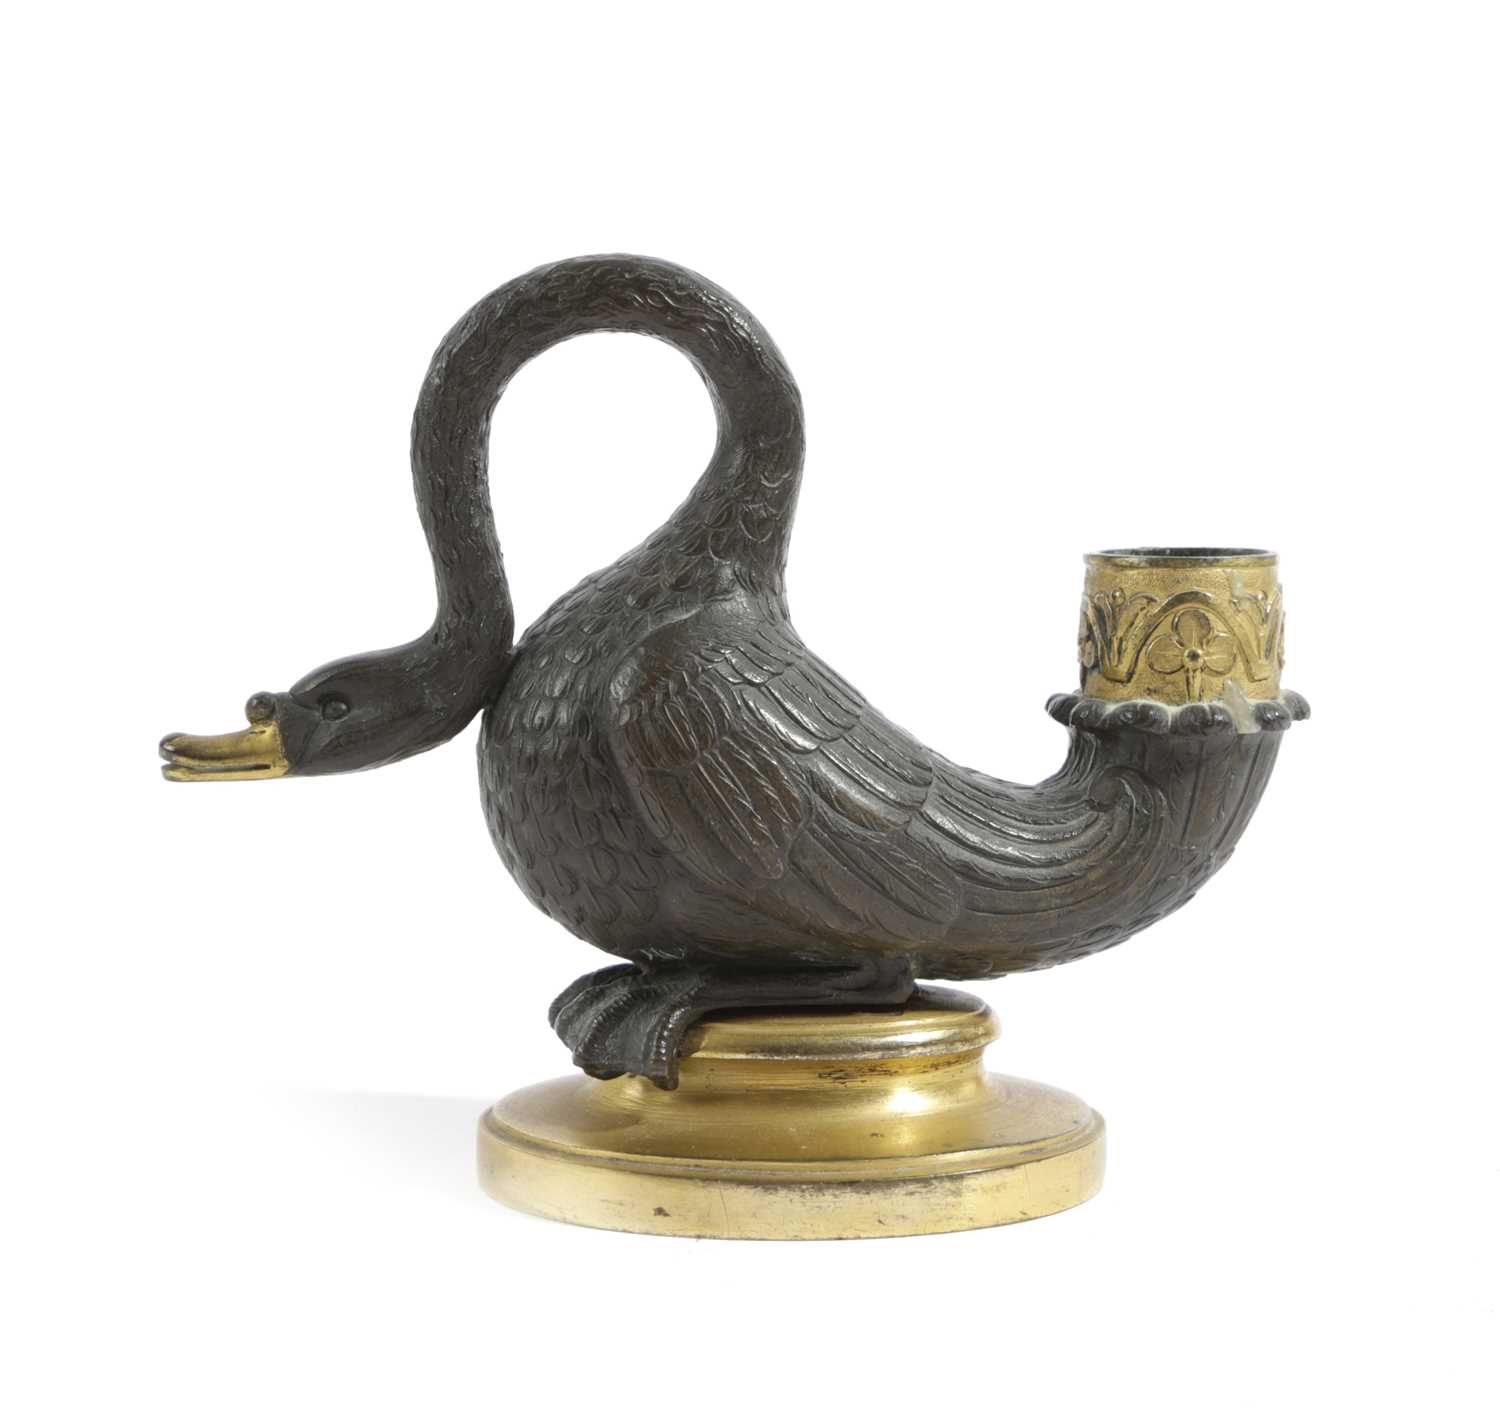 A REGENCY GILT AND PATINATED BRONZE SWAN CHAMBERSTICK EARLY 19TH CENTURY the nozzle decorated with